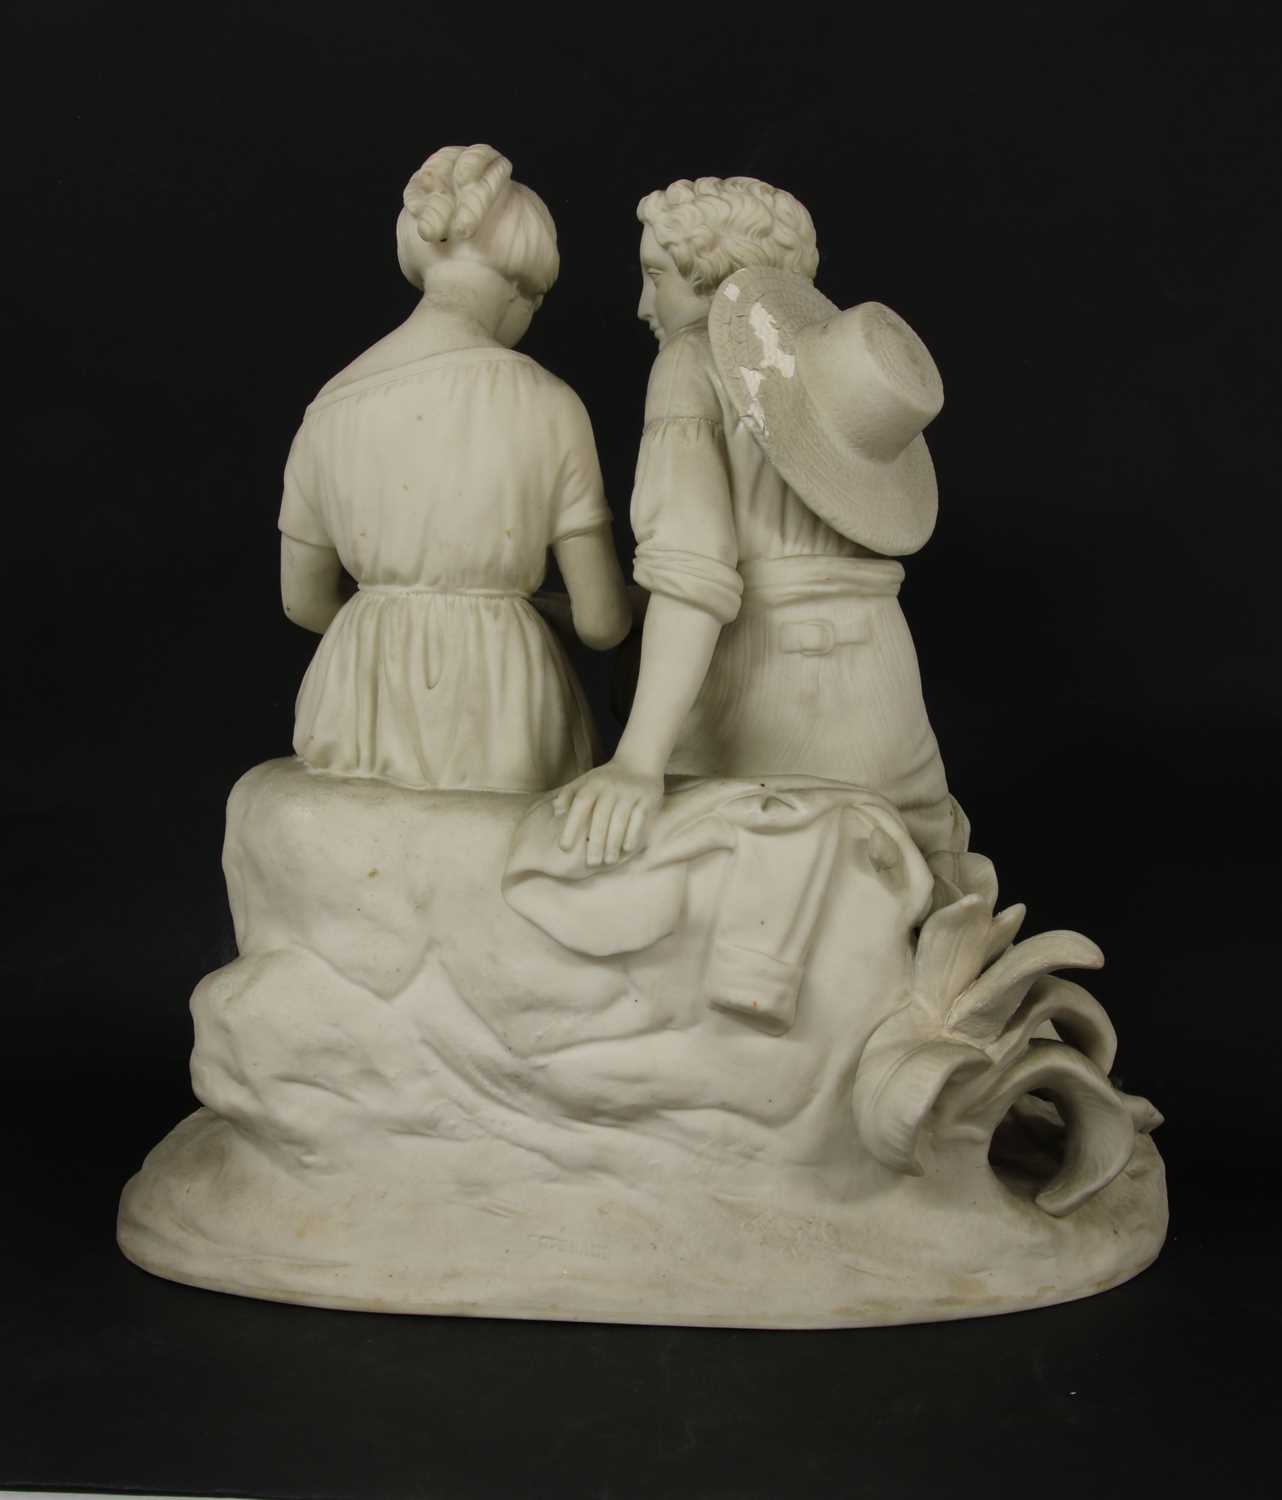 Paul and Virginia, a Copeland parian figure group modelled by Cumberworth, - Image 3 of 3